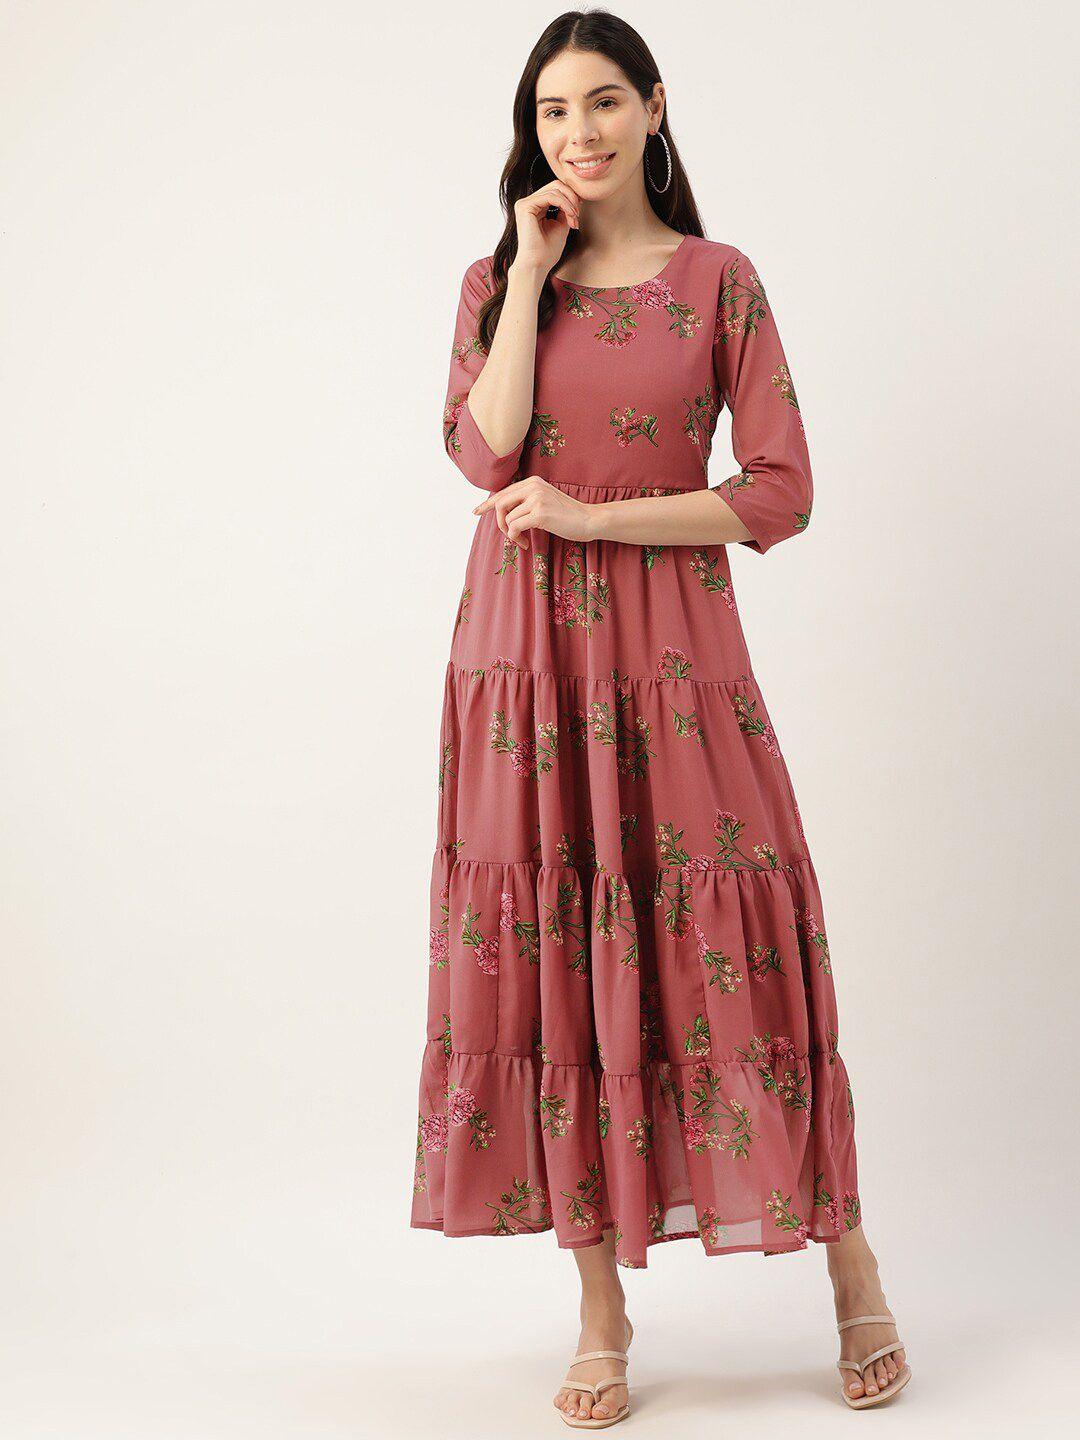 dressberry pink & green floral printed gathered georgette fit & flare midi dress